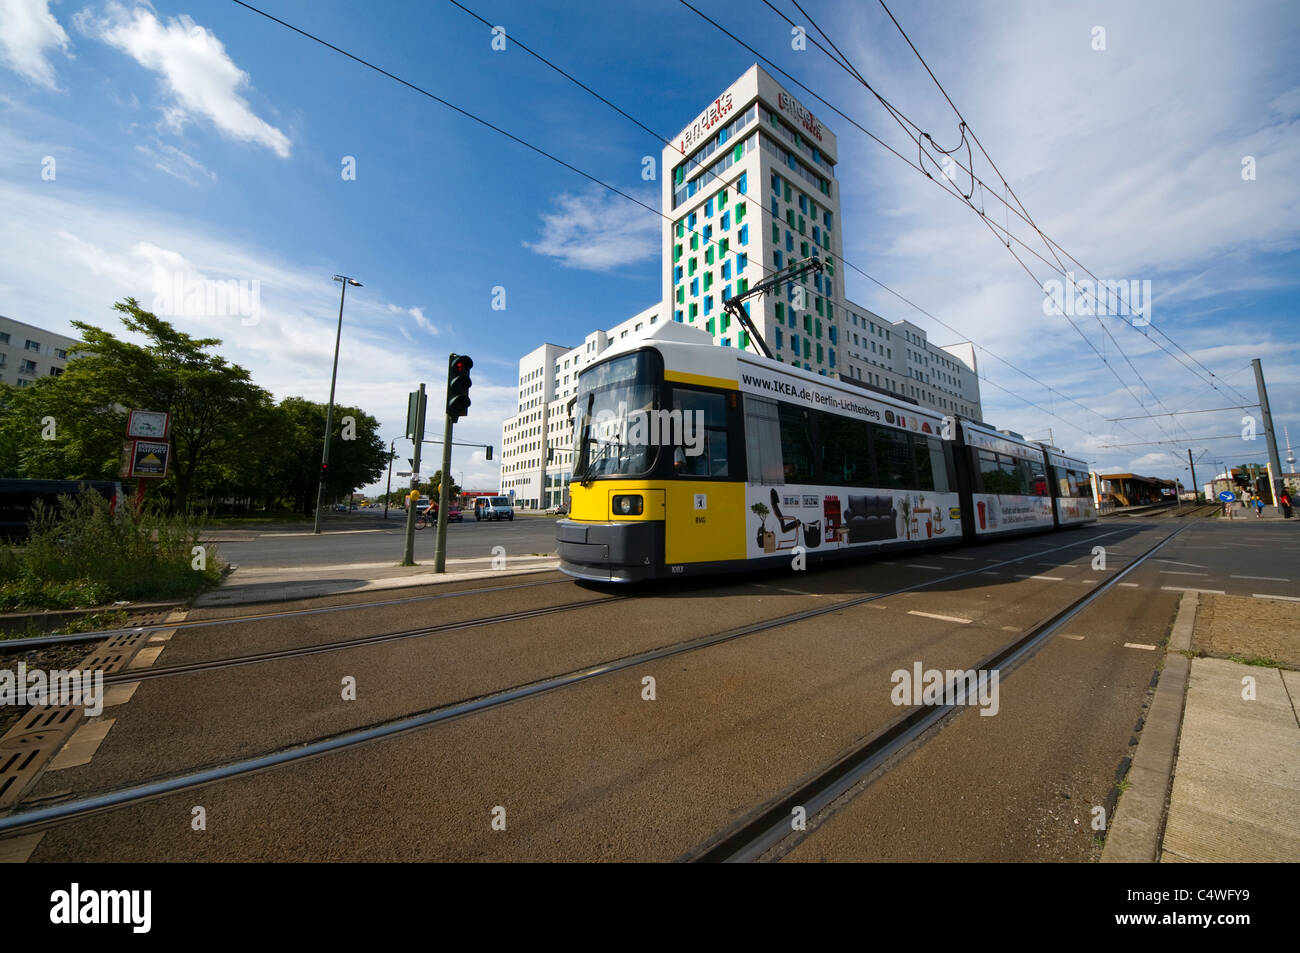 A tram passing in front of Andel's Hotel, East Berlin Stock Photo